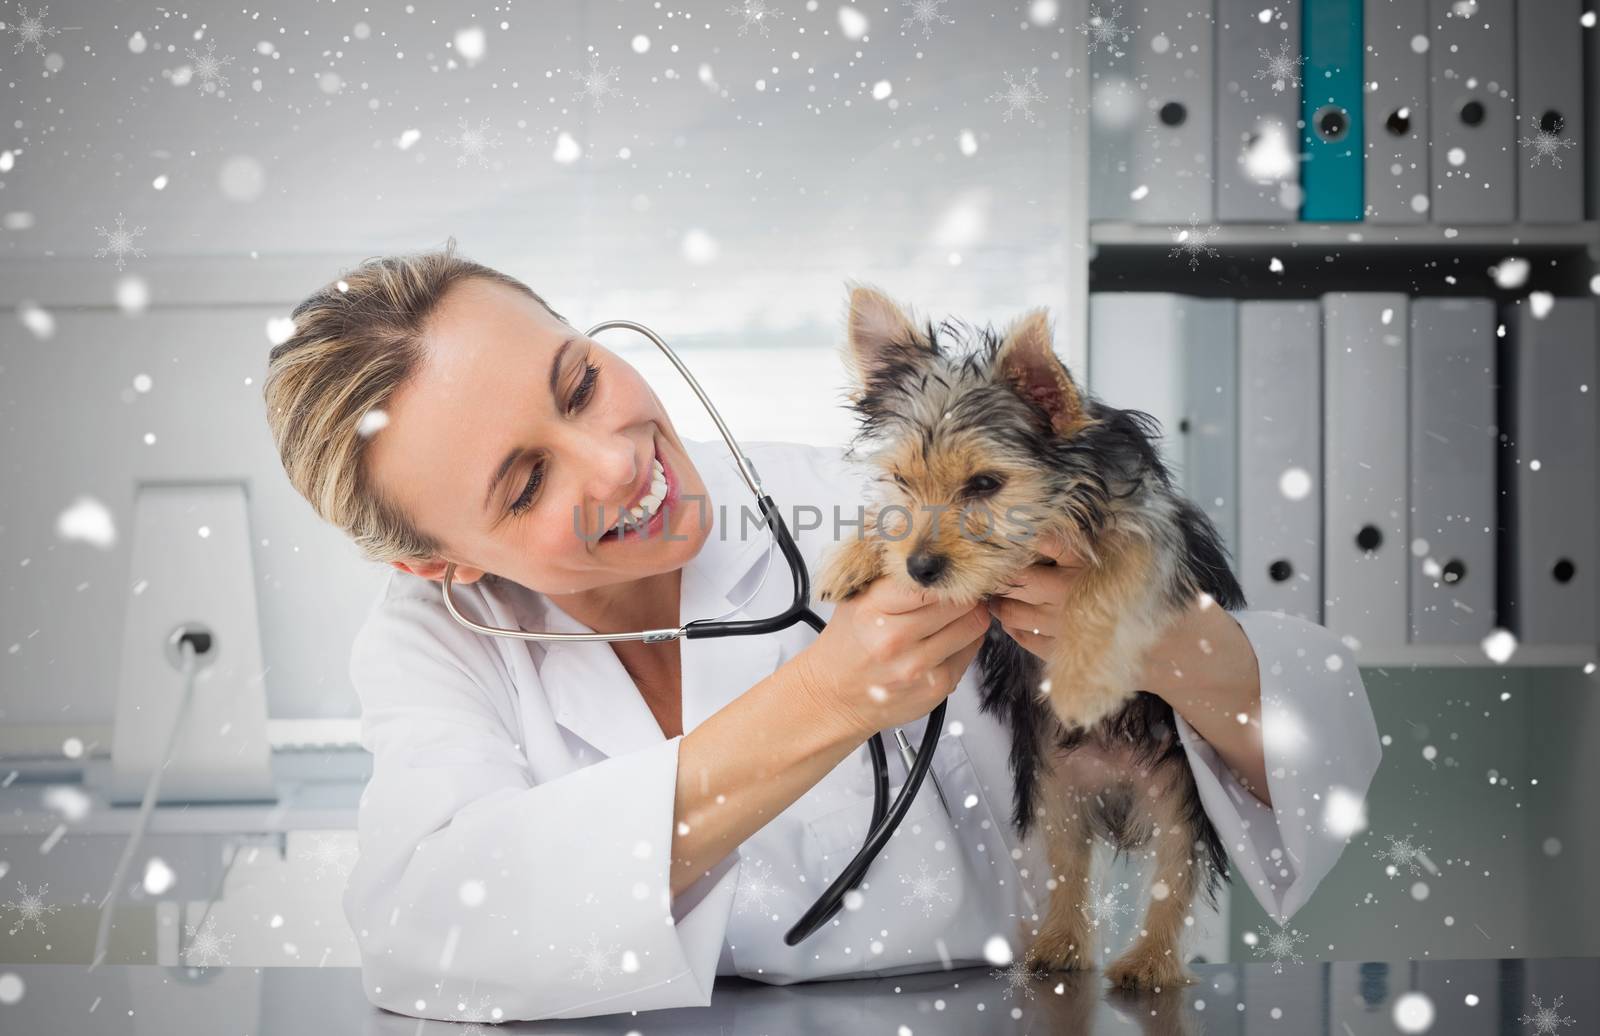 Veterinarian checking dog with stethoscope against snow falling